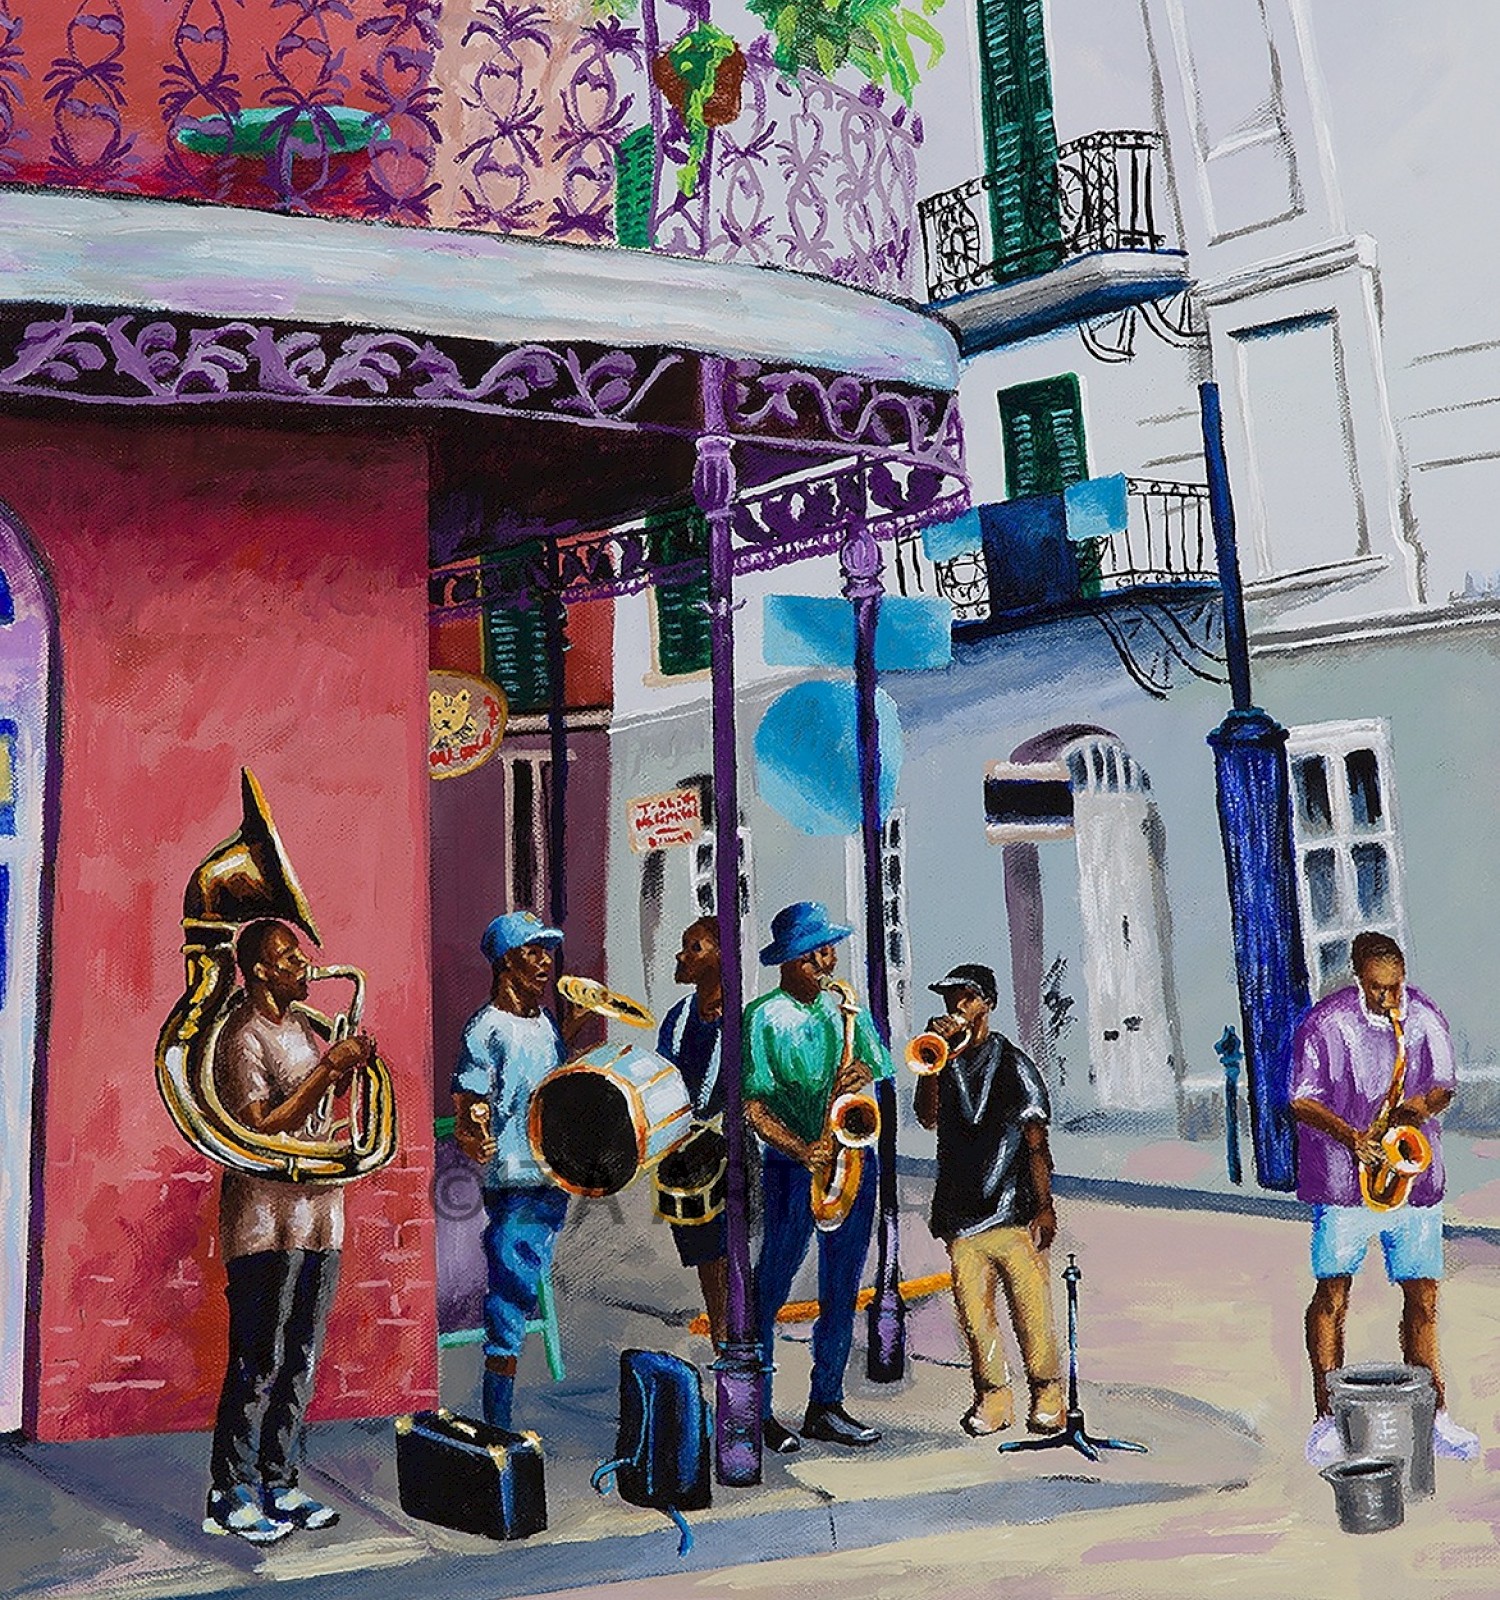 The image depicts a lively street with five musicians playing various brass instruments in front of a colorful building with ornate balconies.